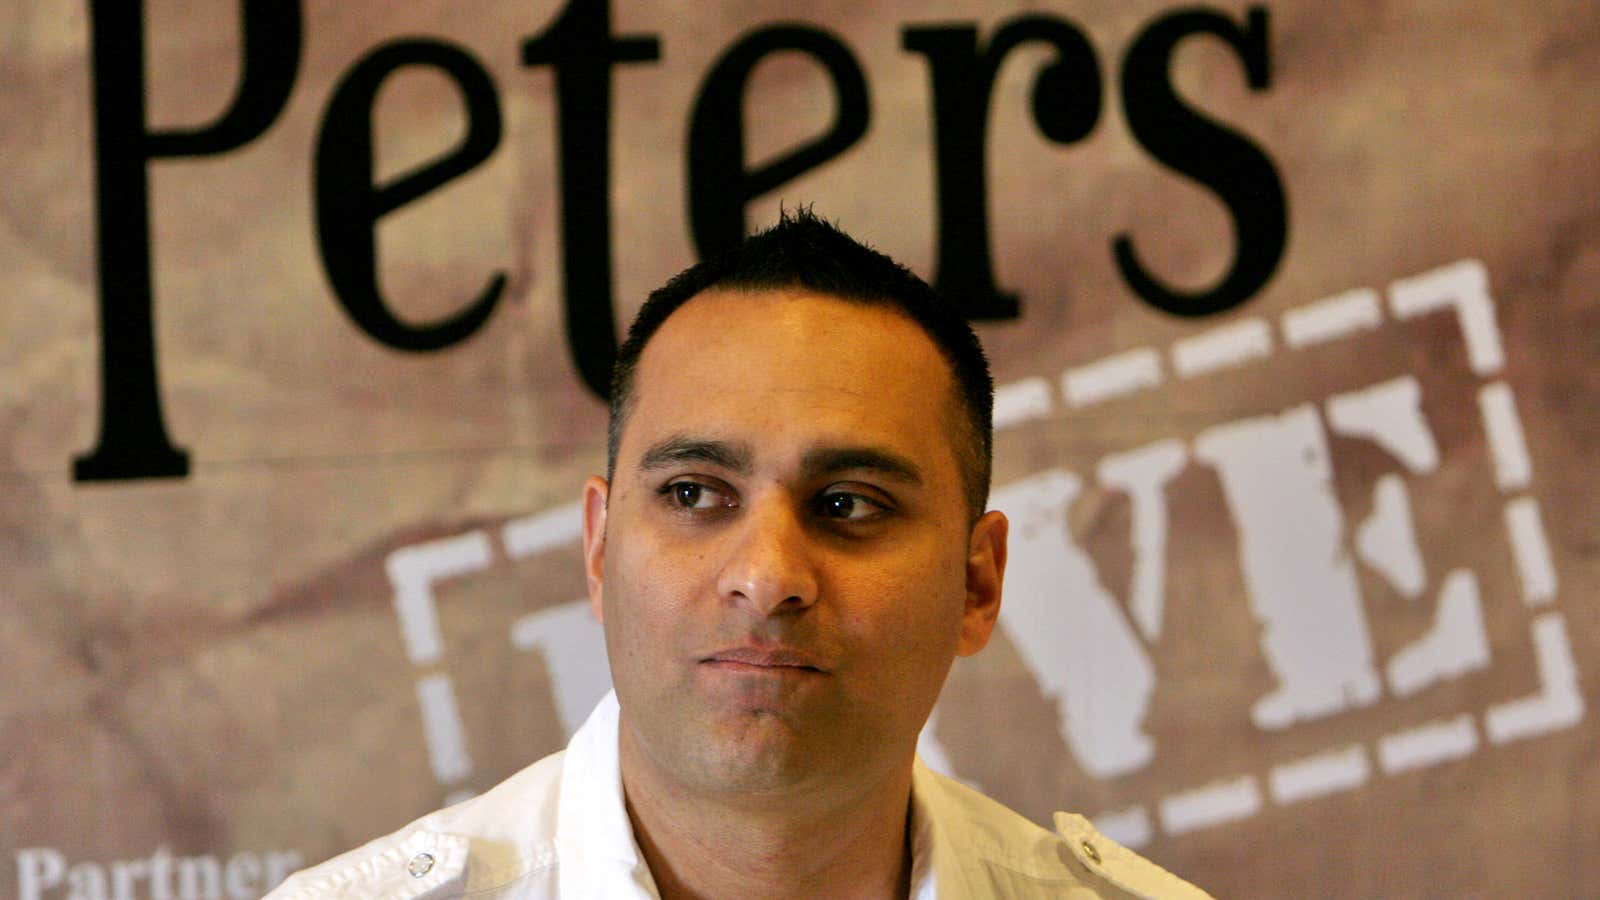 Comedian Russell Peters is one of the few images of India that is present on Chinese social media.